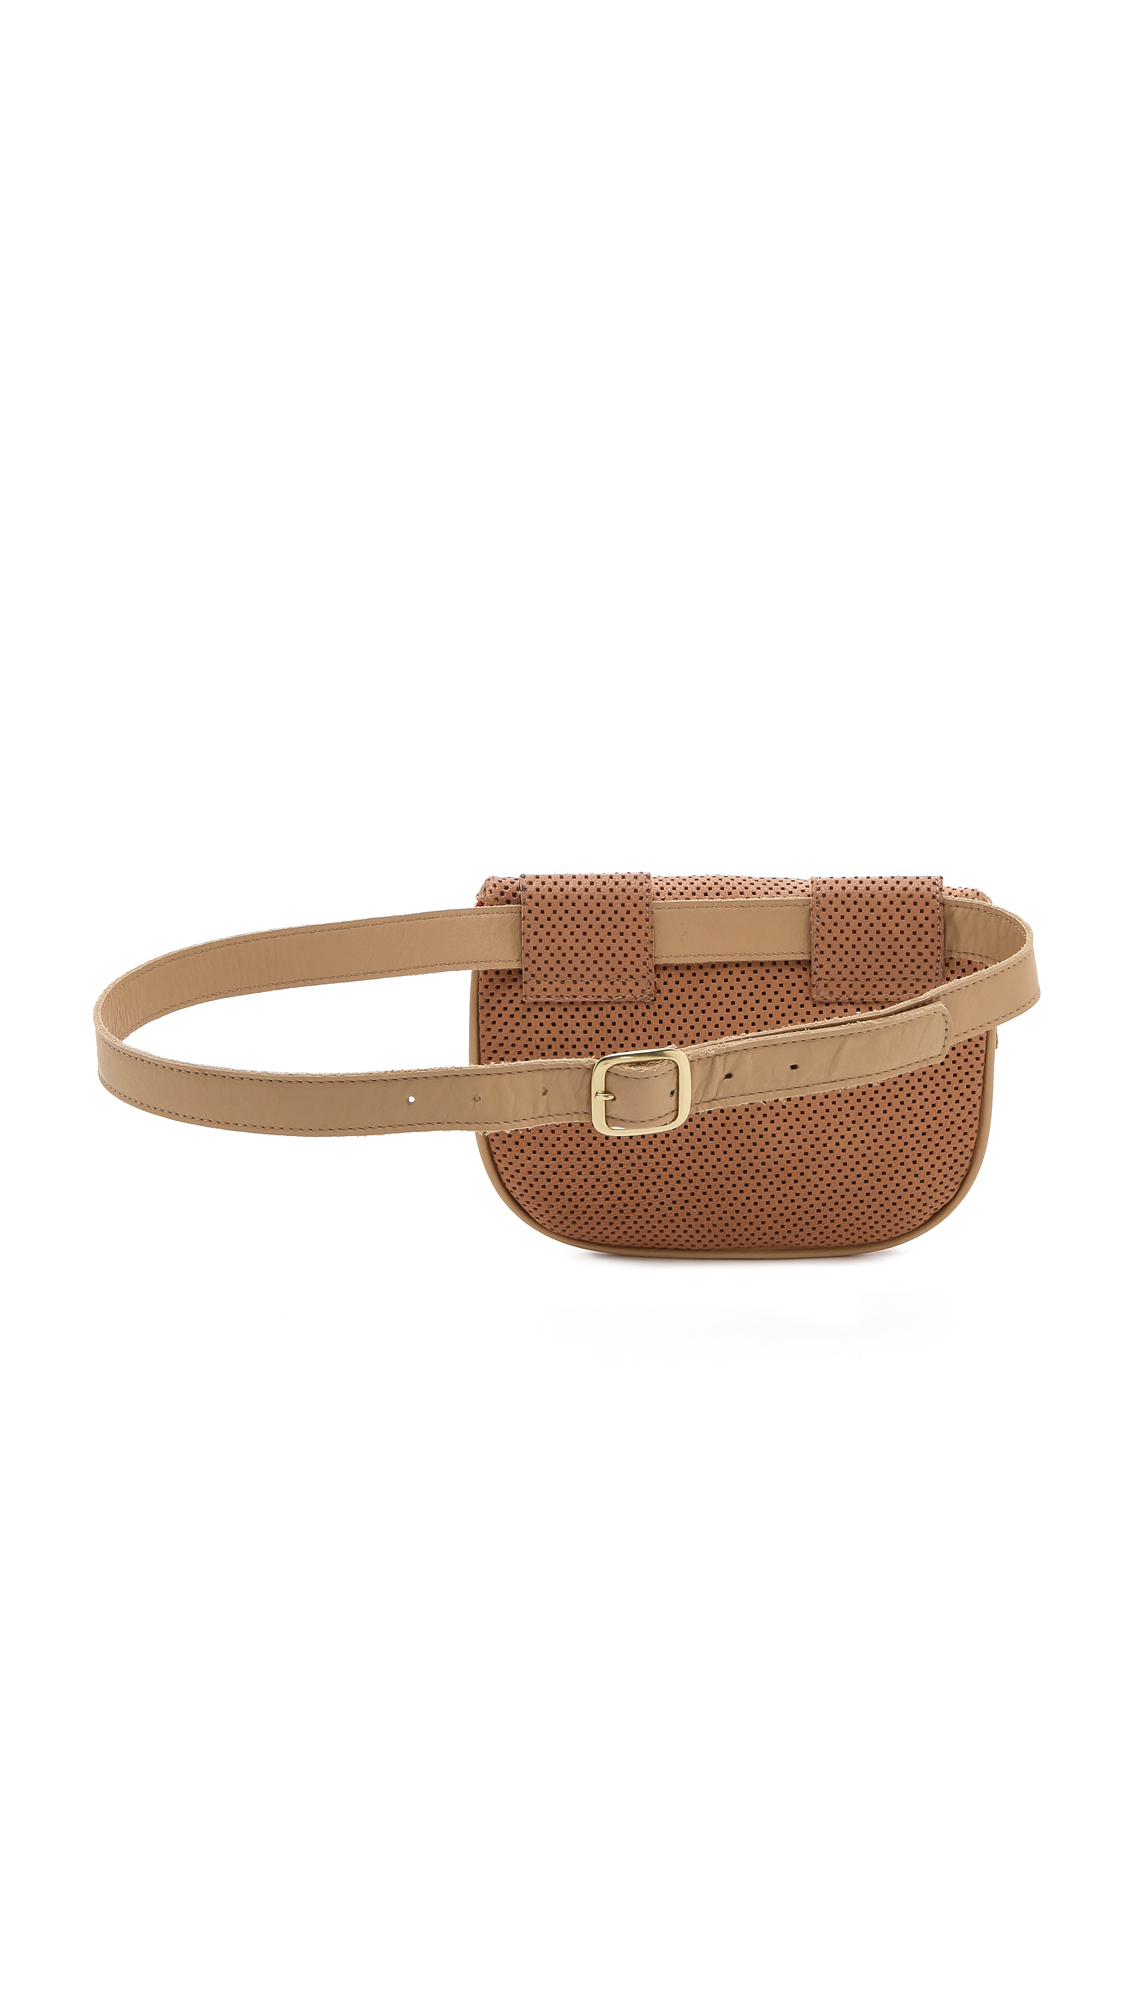 Clare V. Supreme Fanny Pack Tan in Brown - Lyst